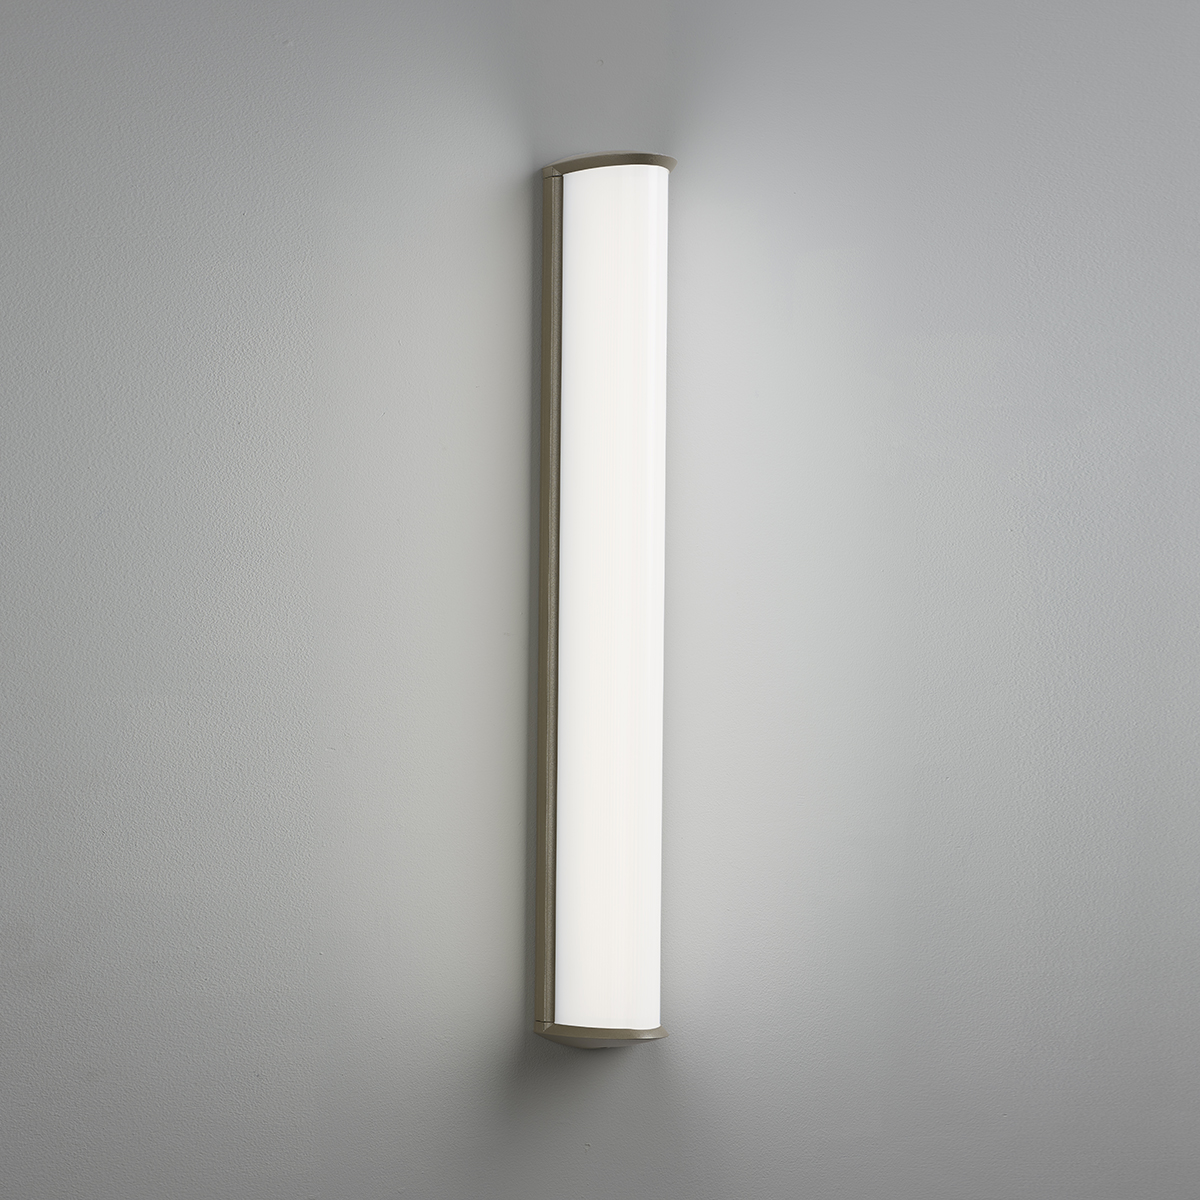 A luminous surface-mounted luminaire with a curved linear diffuser body